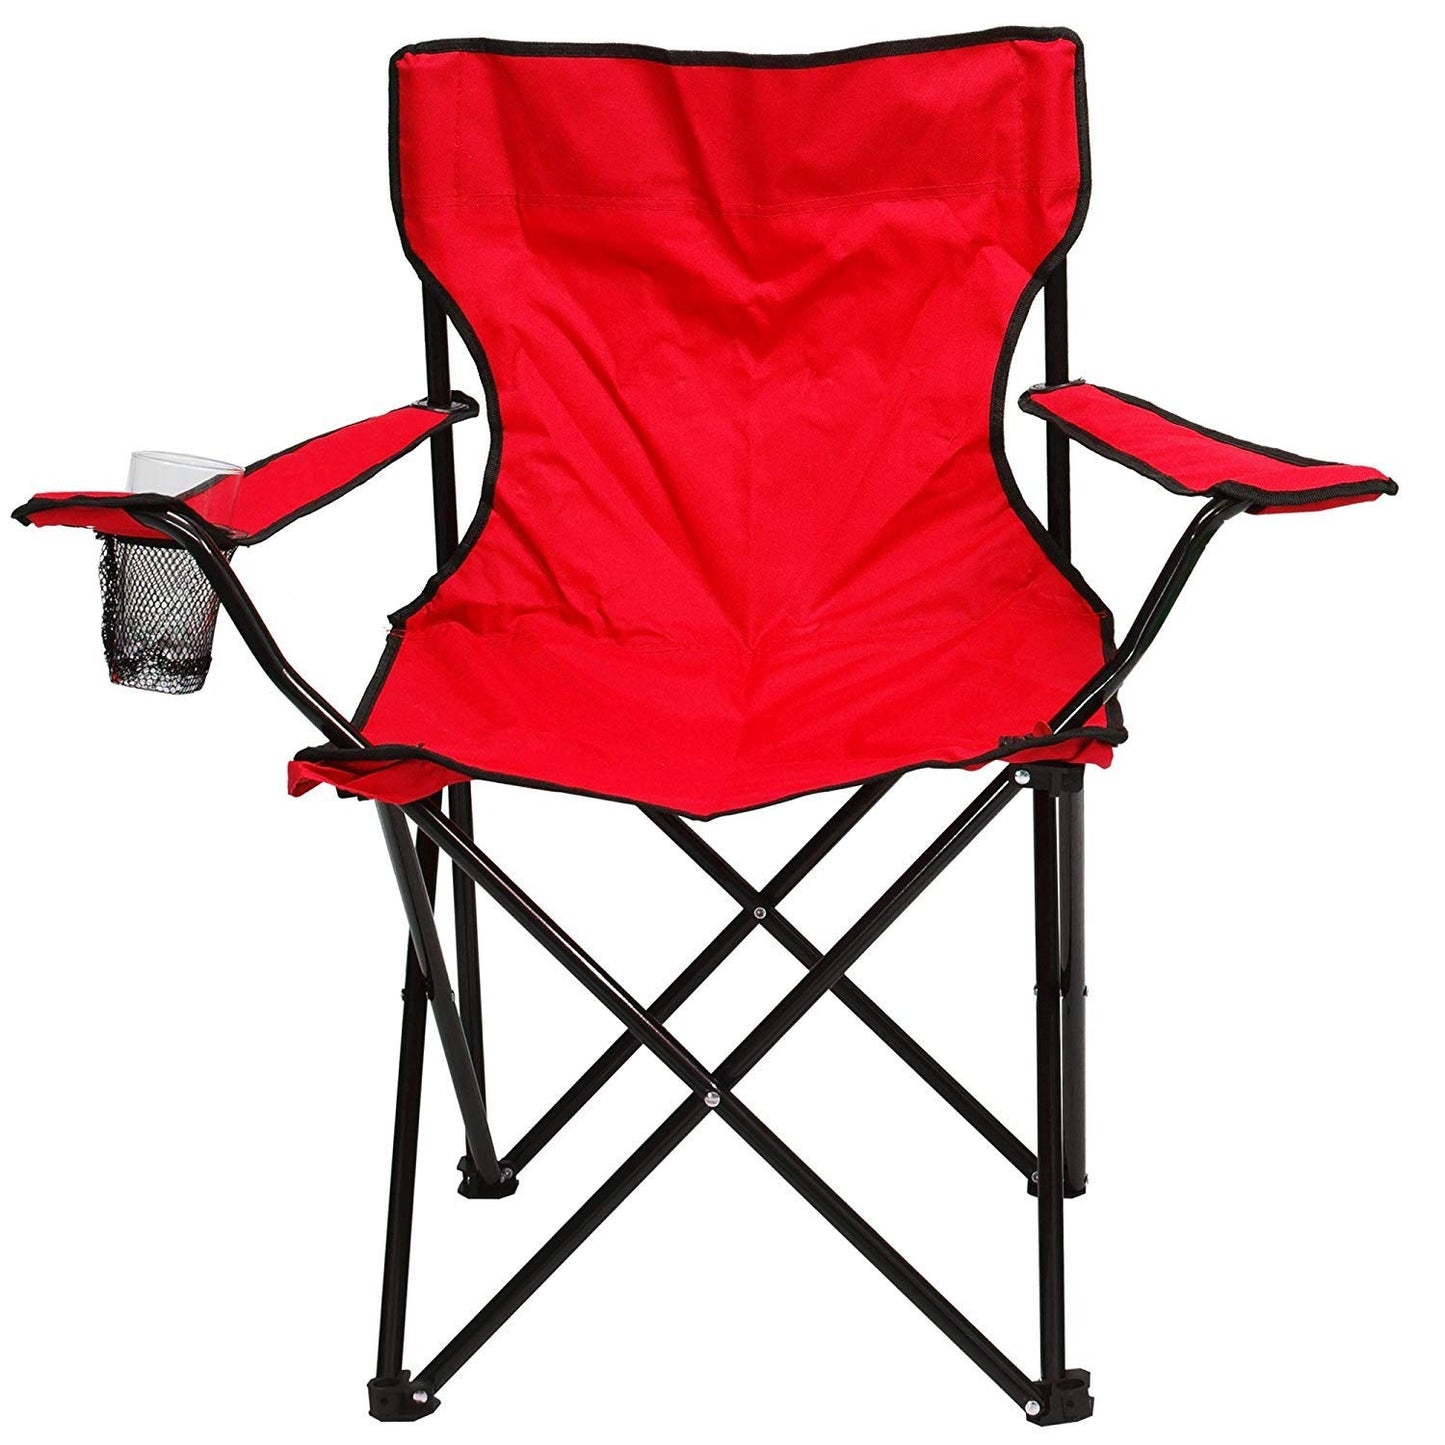 Foldable Camping Outdoor Chair